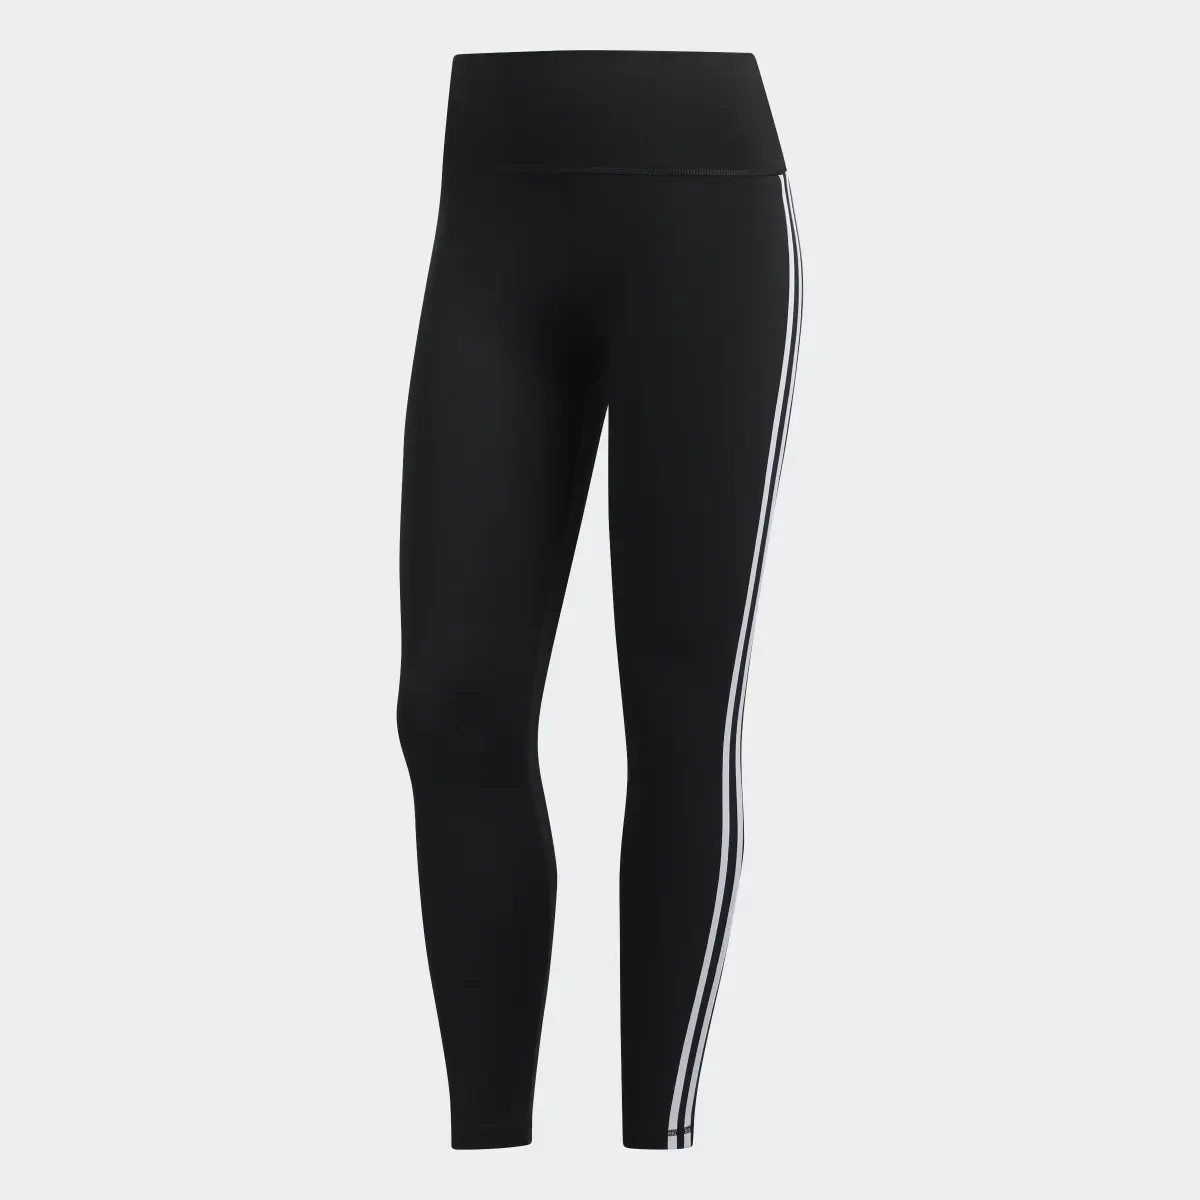 Adidas Believe This 2.0 3-Stripes 7/8 Tights. 1